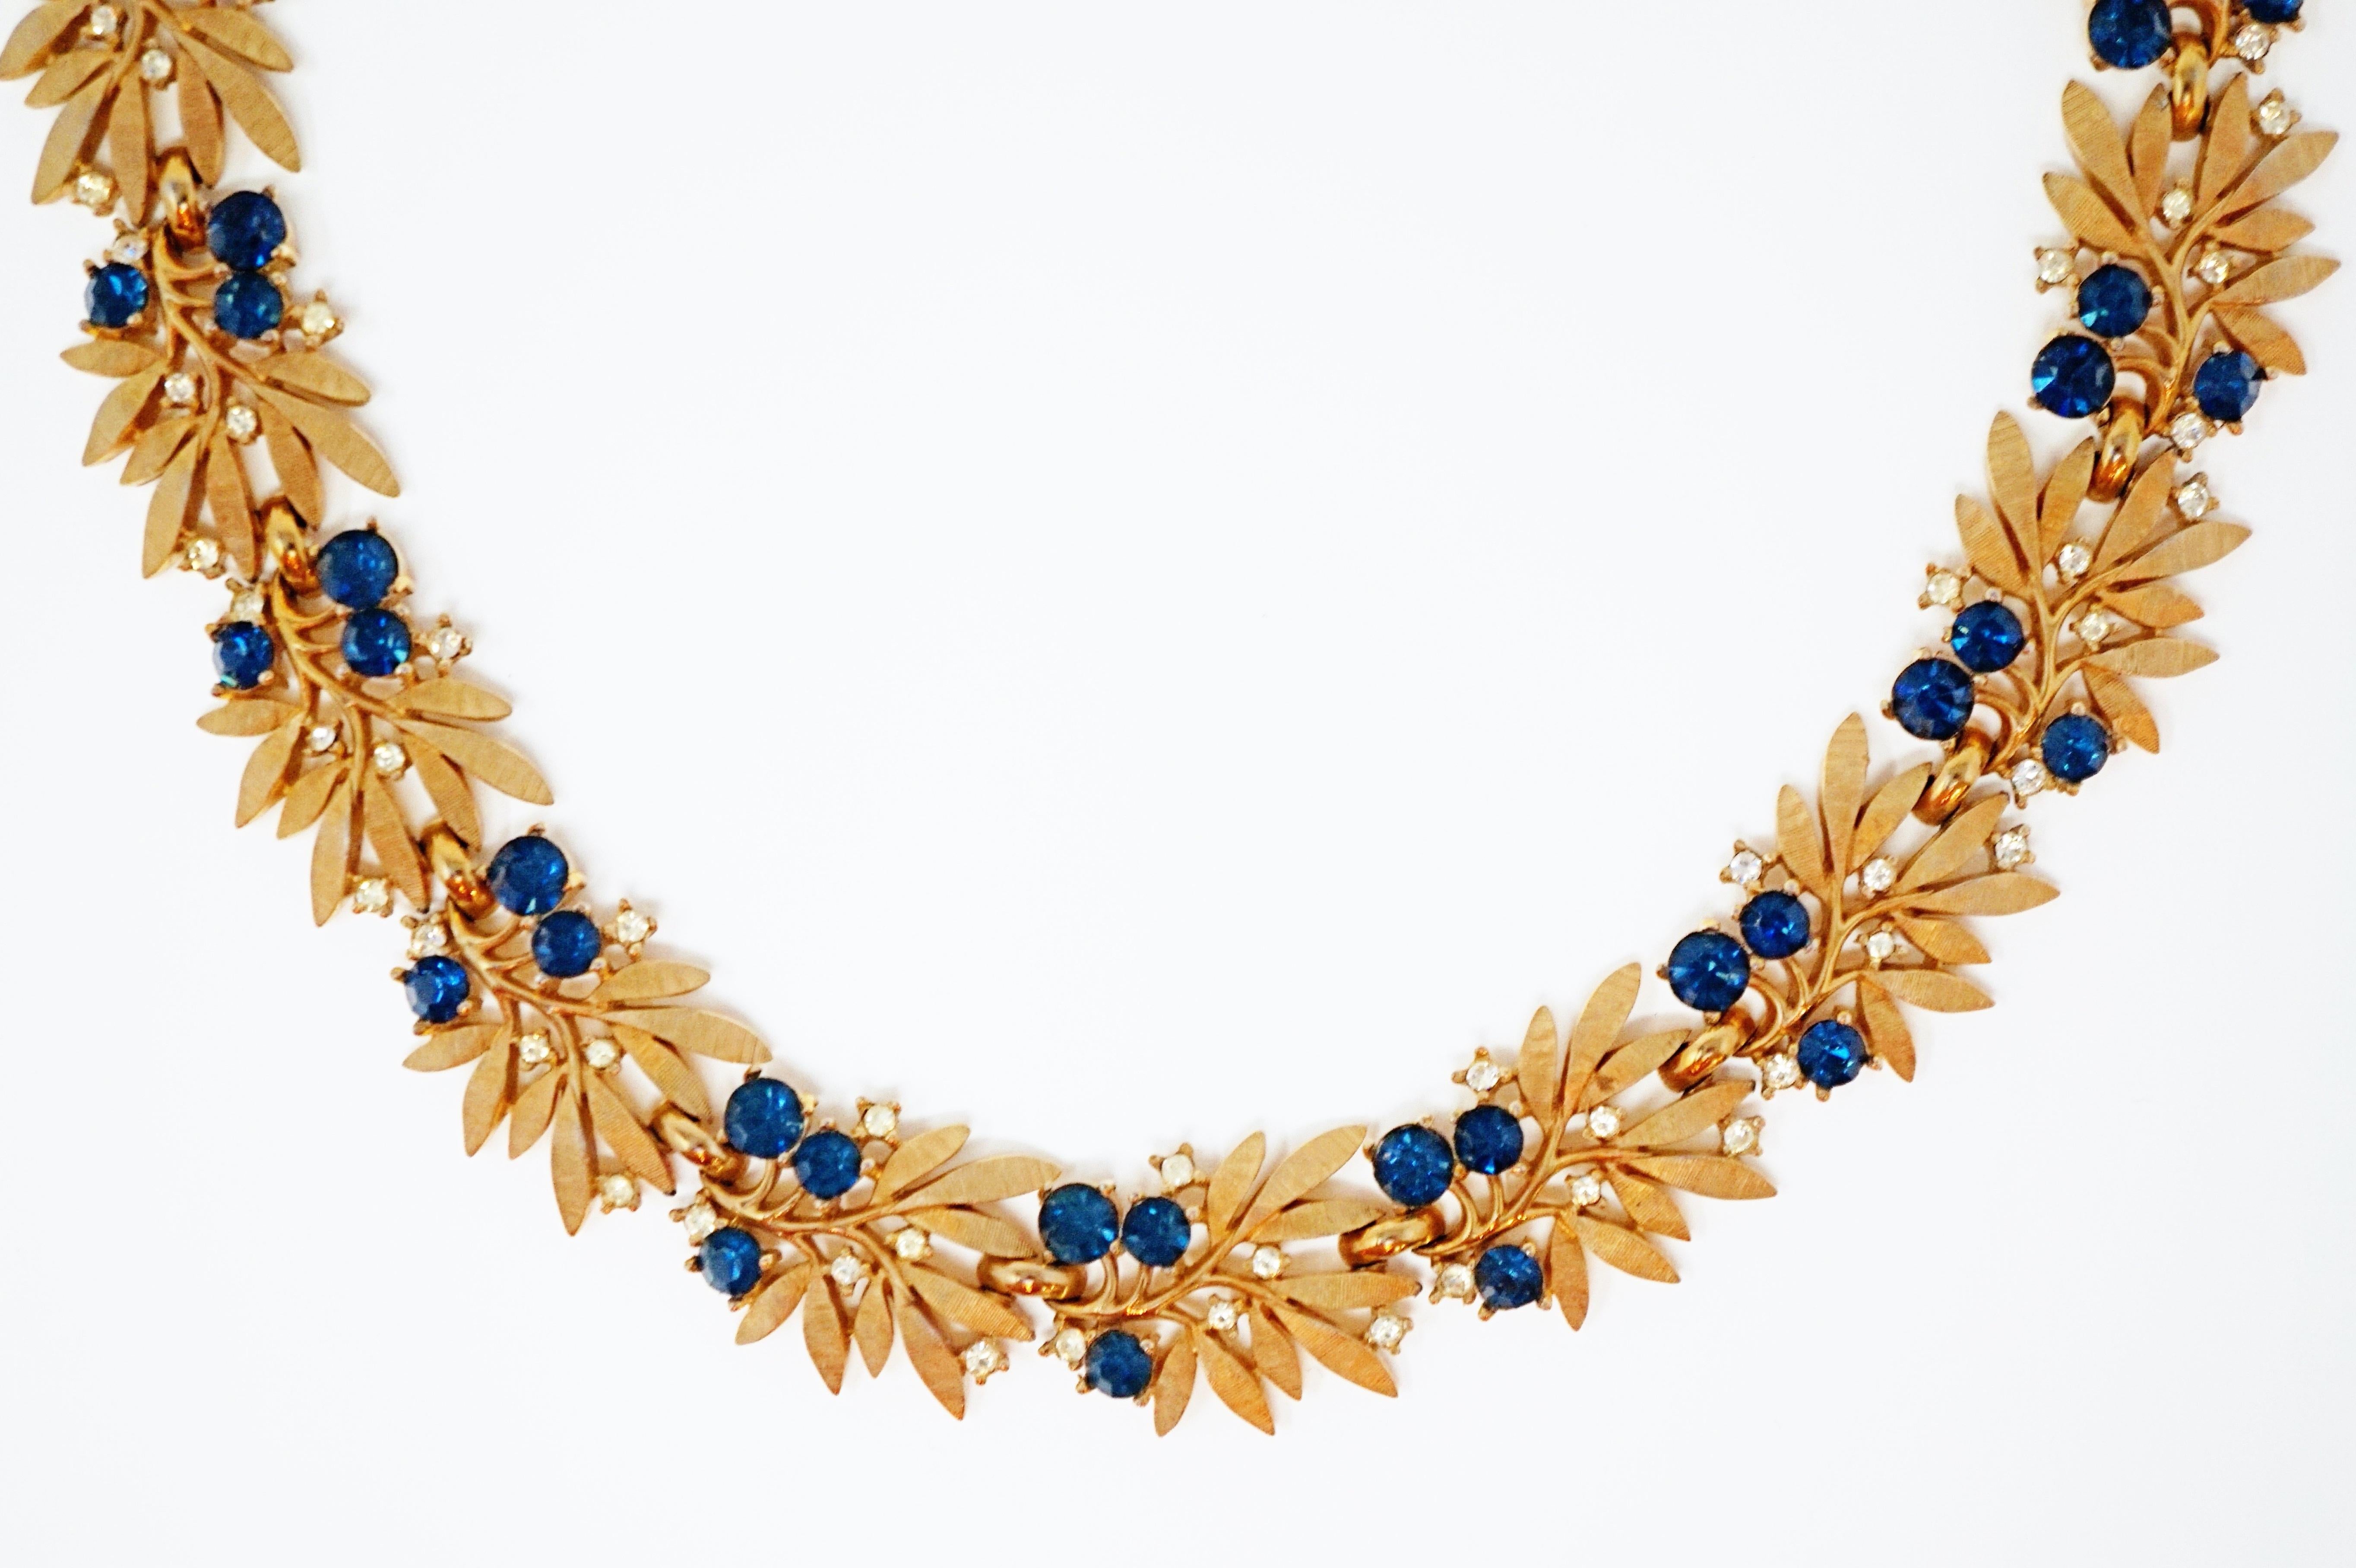 Modern Crown Trifari Gilded Choker Necklace with Rhinestones, Signed, circa 1955